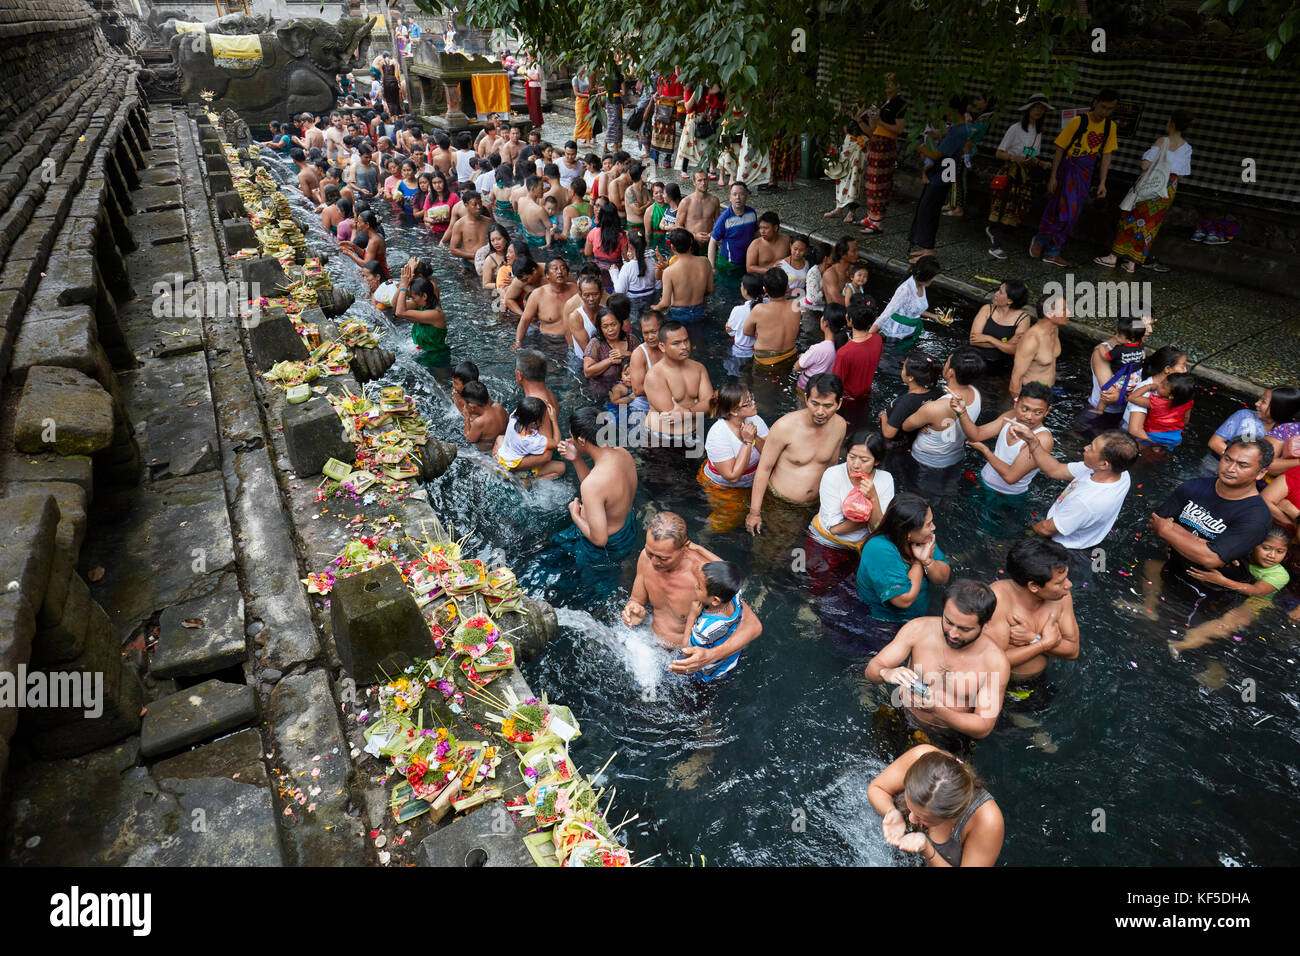 People waiting in line to make ritual purification in the holy spring. Tirta Empul Temple, Tampaksiring, Bali, Indonesia. Stock Photo